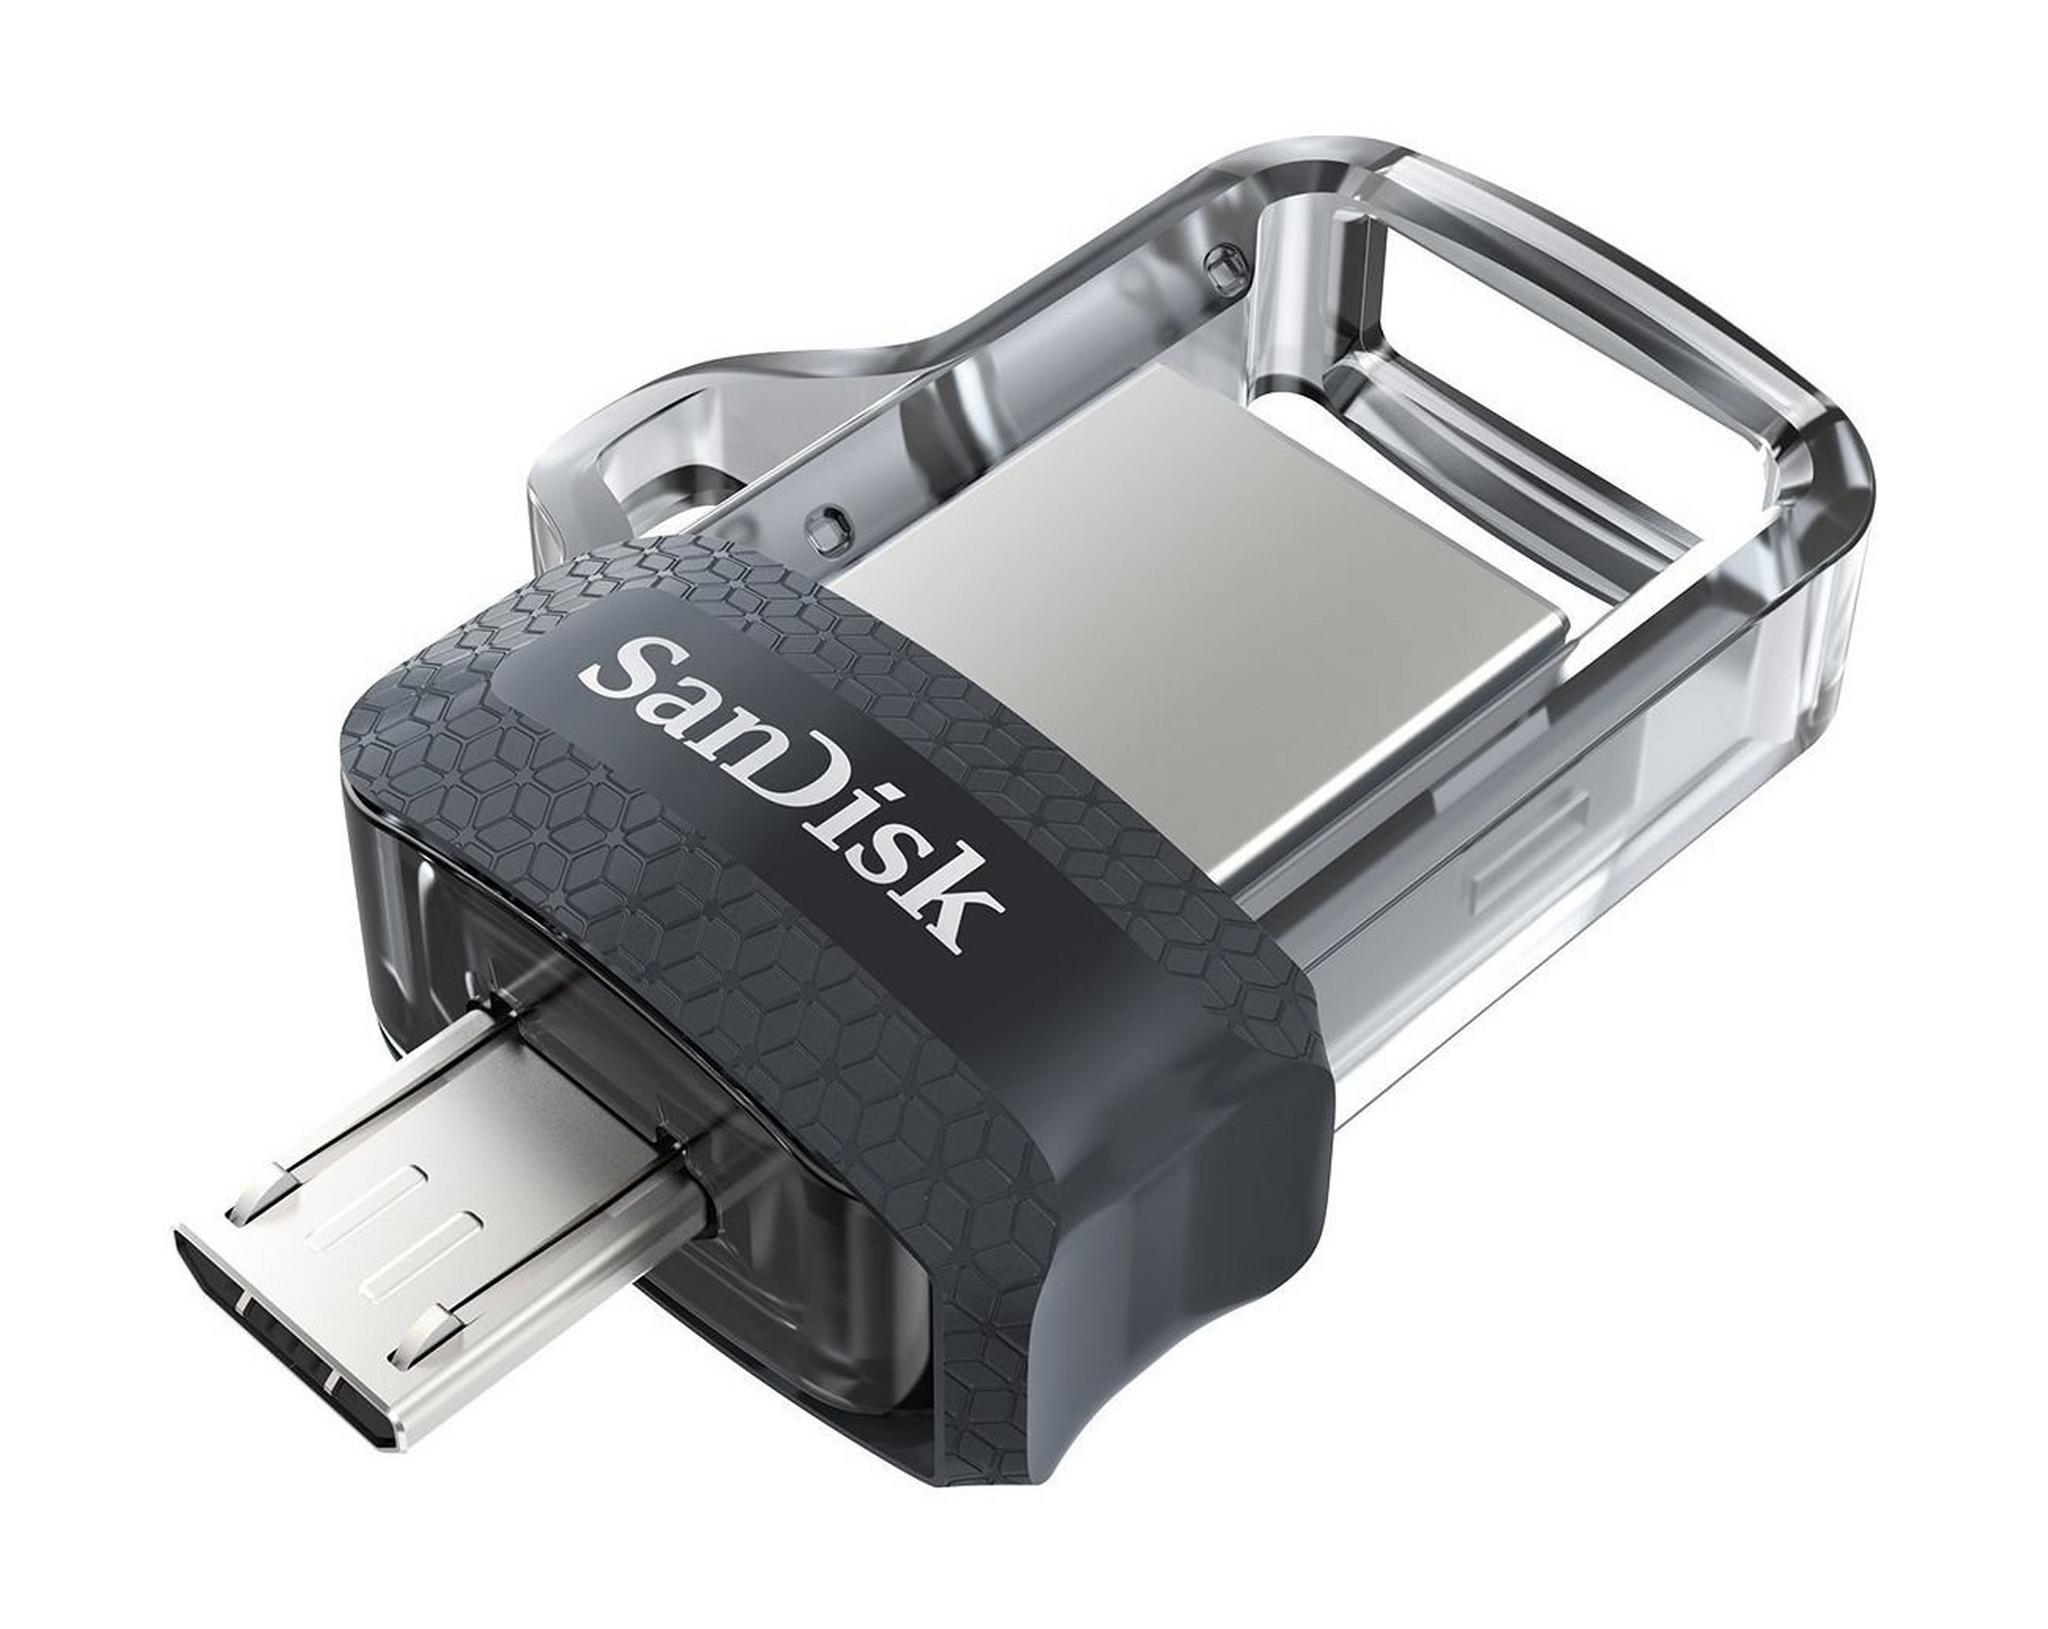 Sandisk 32GB M3.0 Dual USB Drive for Android Devices & Computer - (DD3-032G-G46)